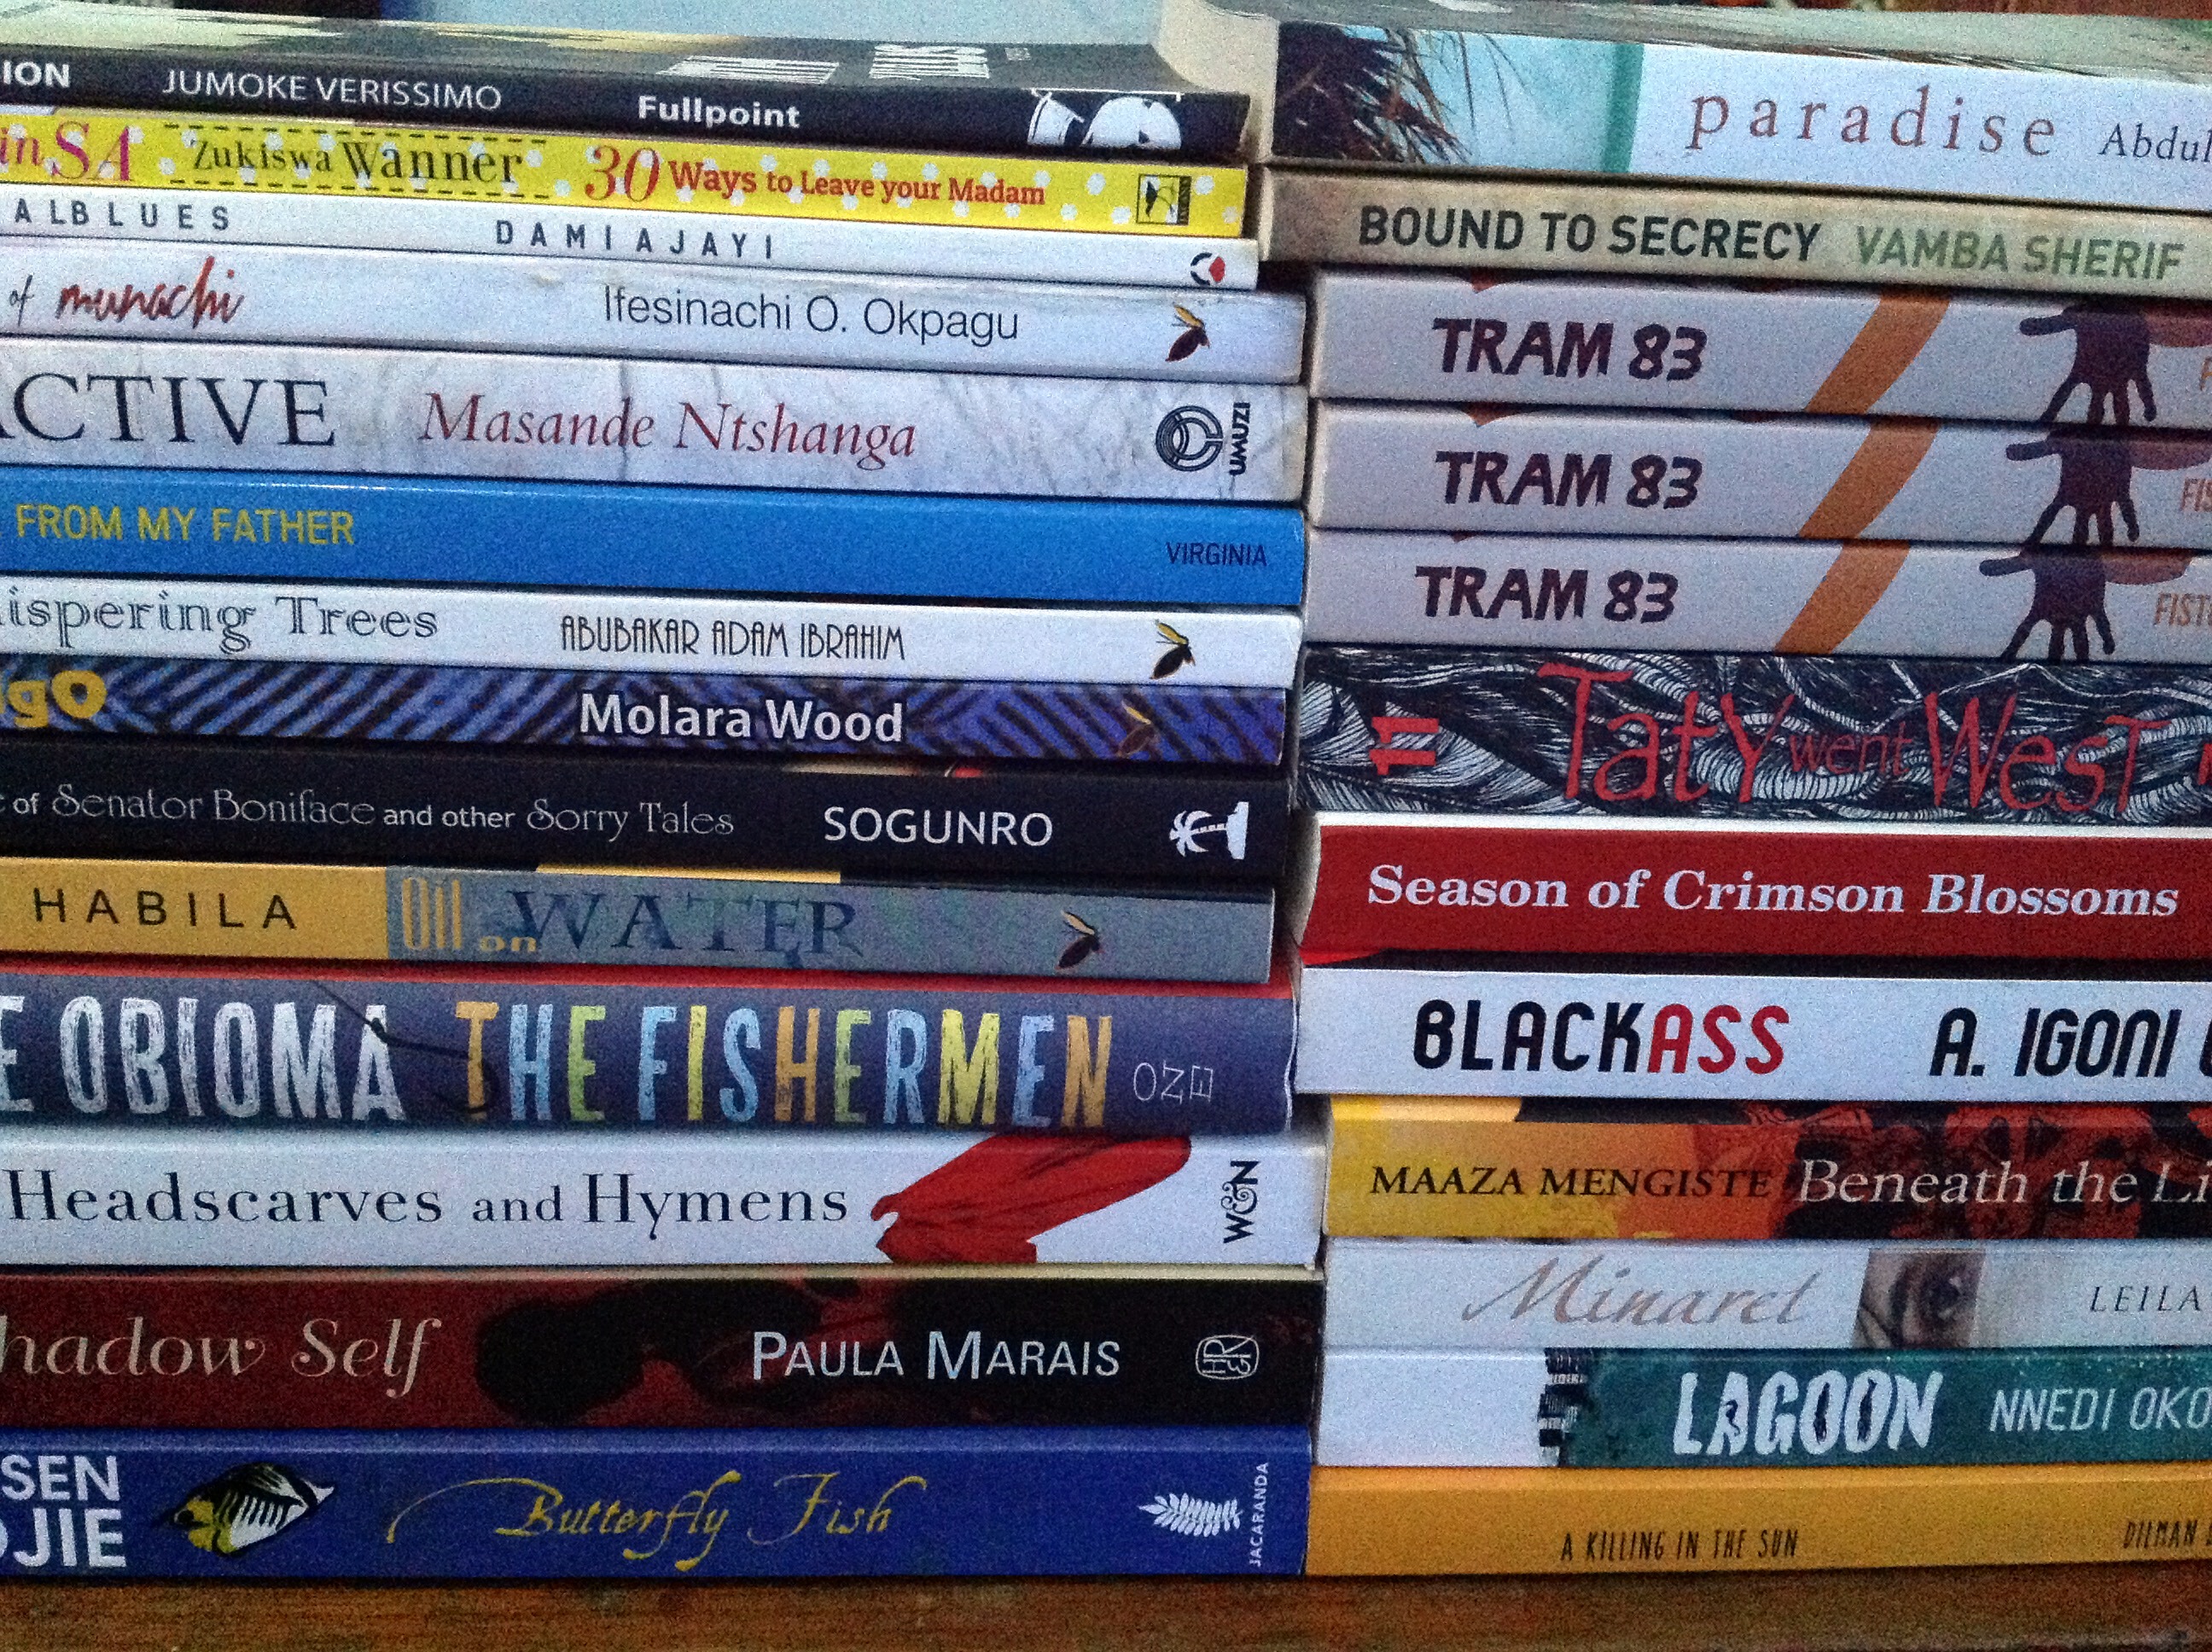 My 27-Book Haul from @AkeFestival #AkeFest15